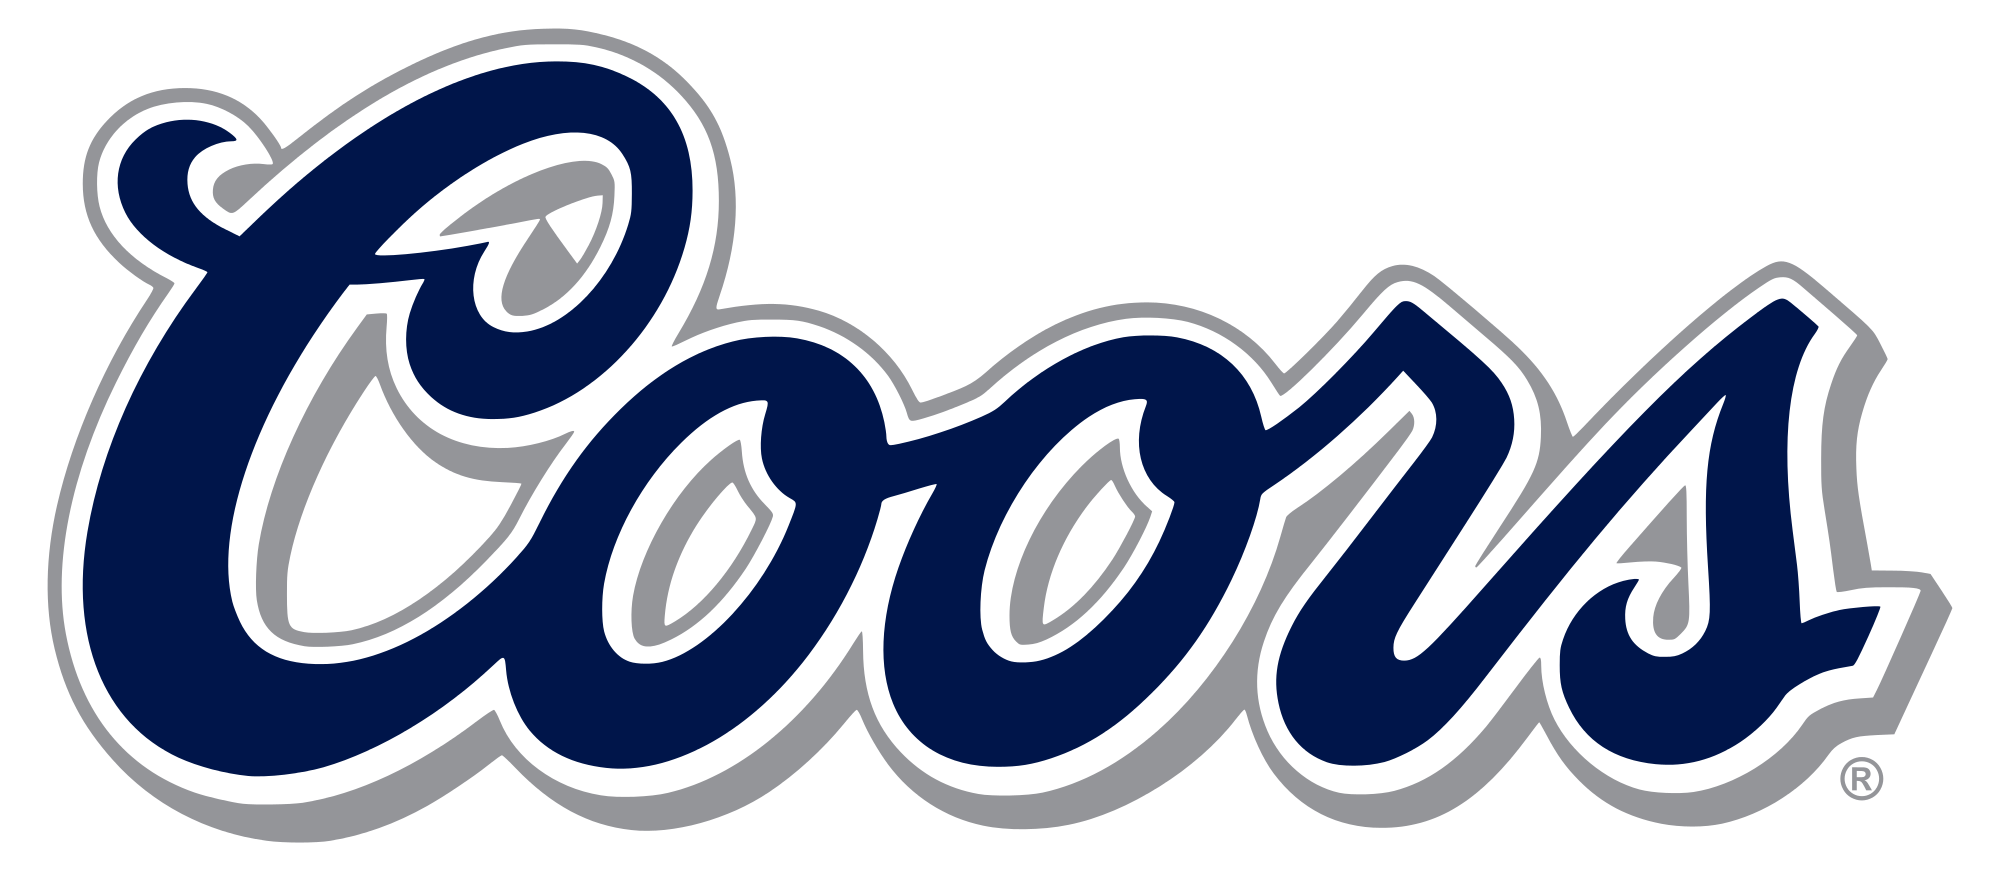 Coors_logo.svg.png